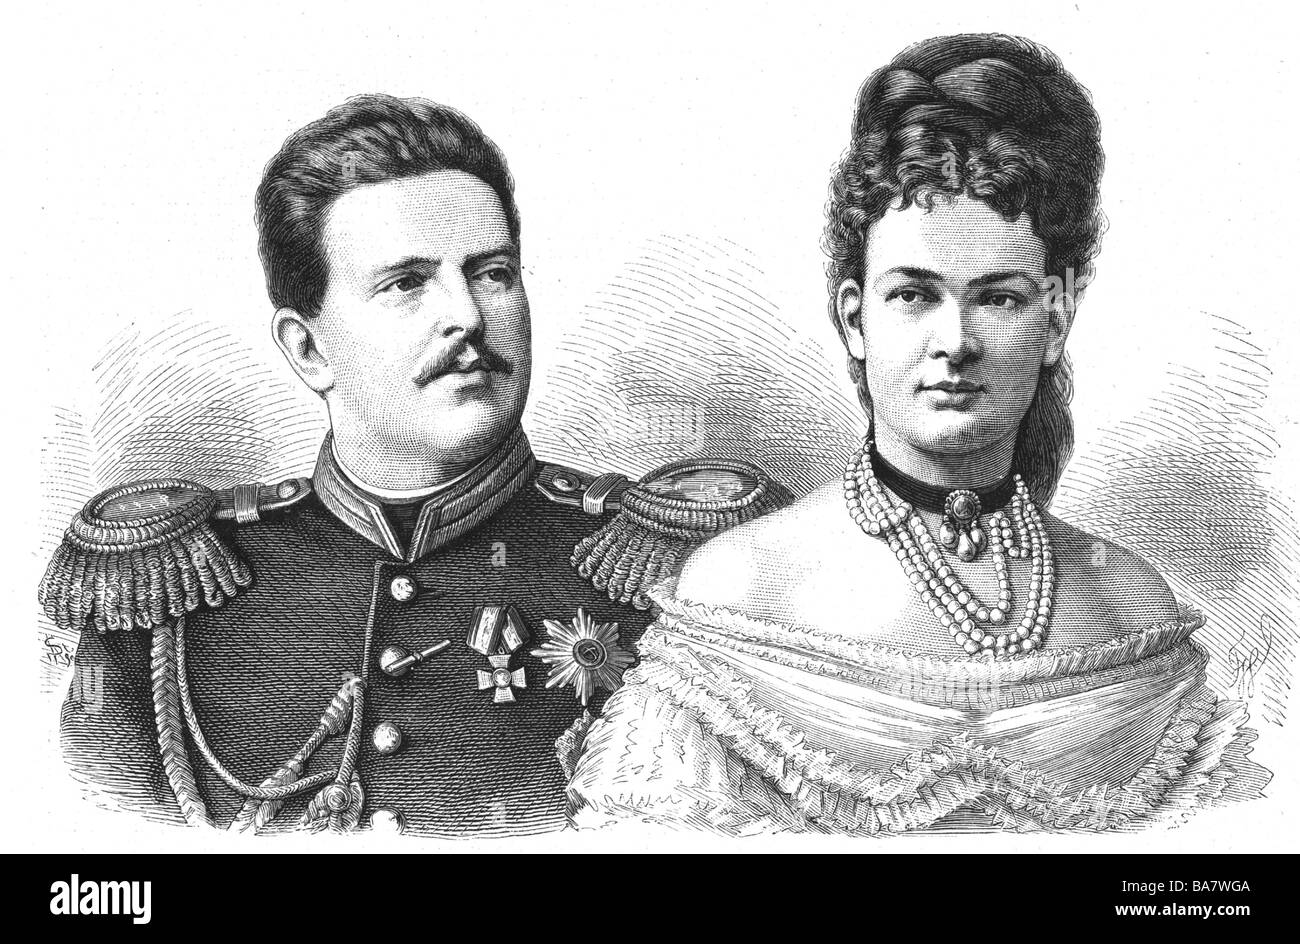 Vladimir Alexandrovich, 22.4. 1847 - 17.2.1909,  Grand Duke of Russia, with his wife Marie of Mecklenburg-Schwerin, portrait, wood engraving after drawing by J. Weiss, published on the occasion of their marriage, 28.8.1874, Stock Photo